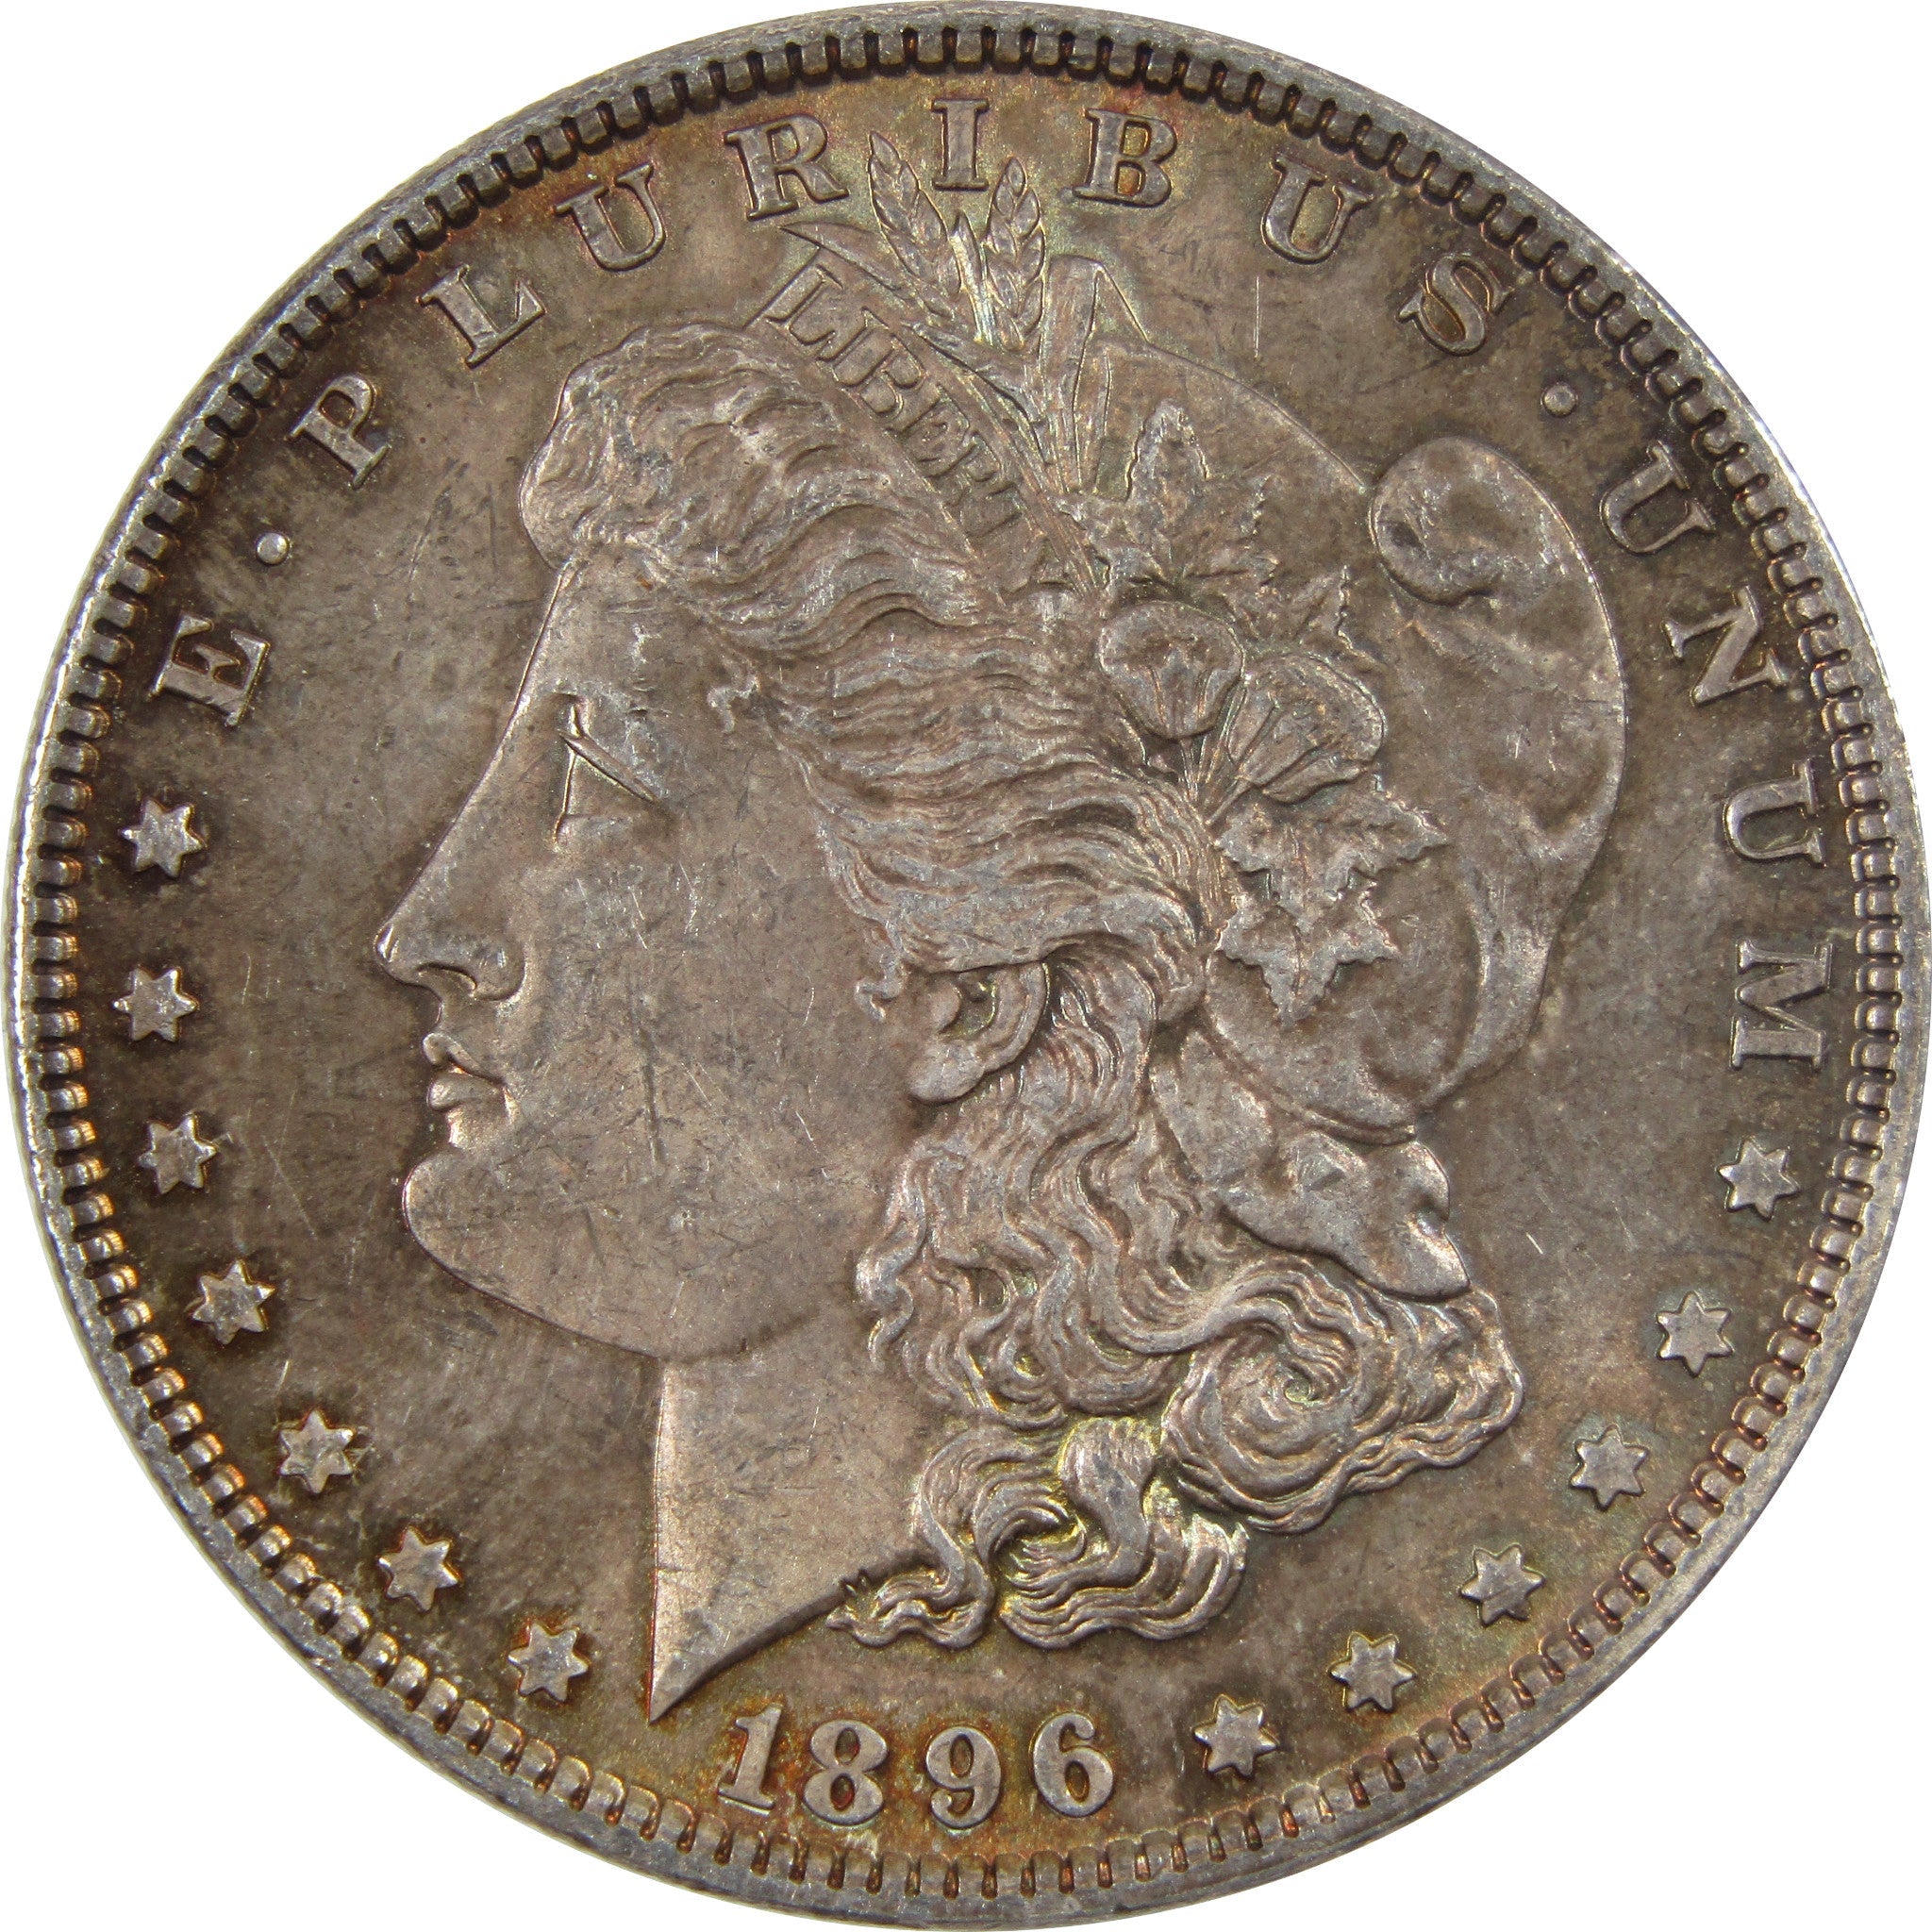 1896 Morgan Dollar AU About Uncirculated 90% Silver $1 Coin SKU:I5485 - Morgan coin - Morgan silver dollar - Morgan silver dollar for sale - Profile Coins &amp; Collectibles